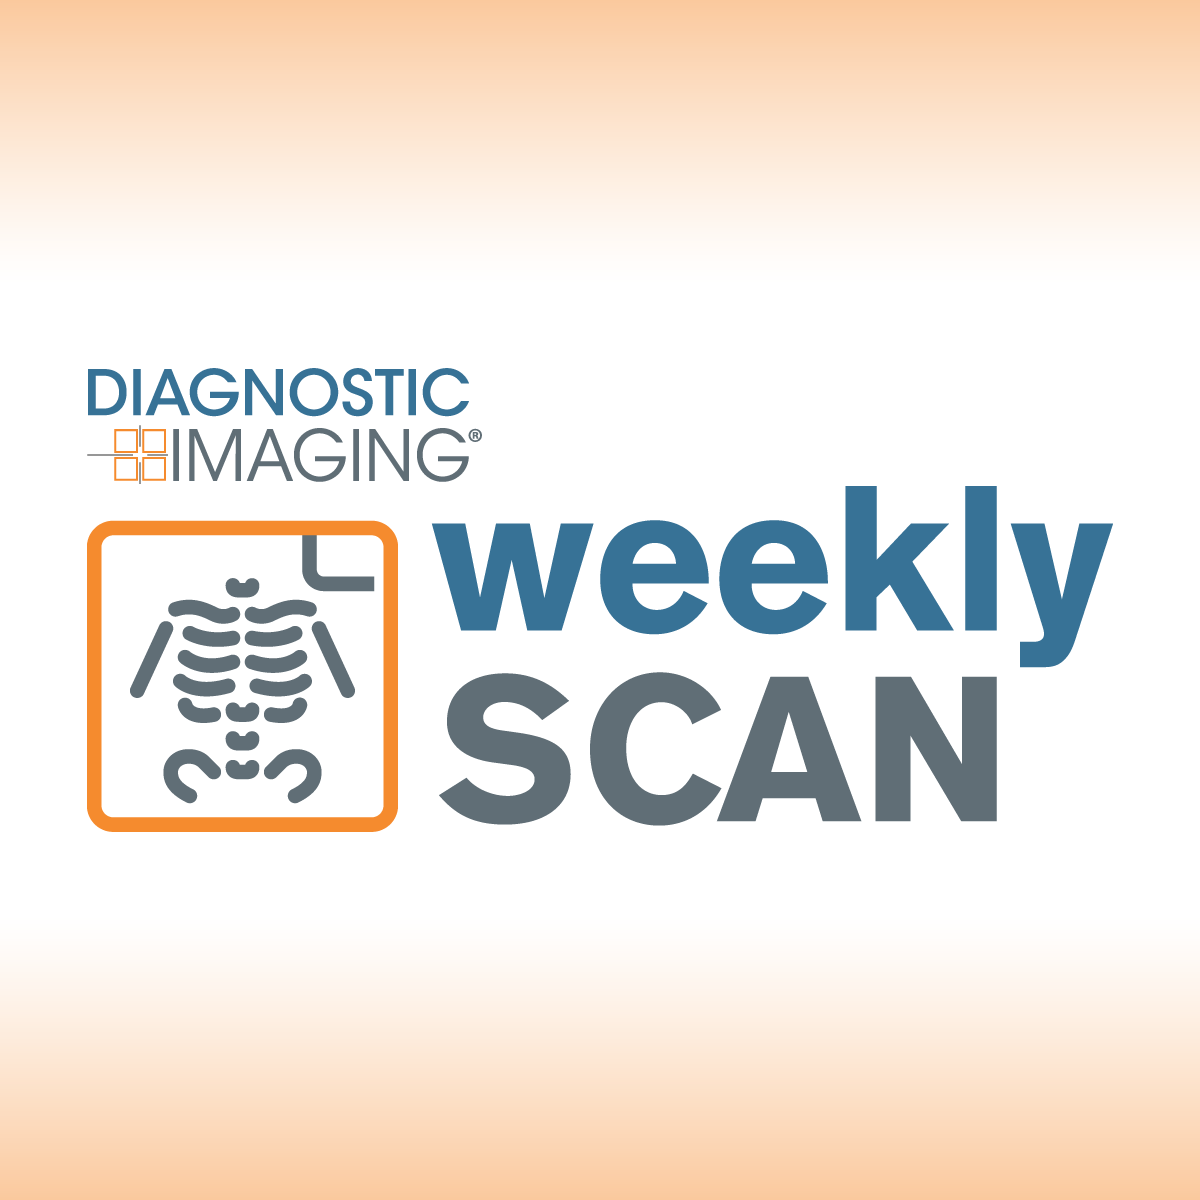 Diagnostic Imaging's Weekly Scan: July 30-August 5